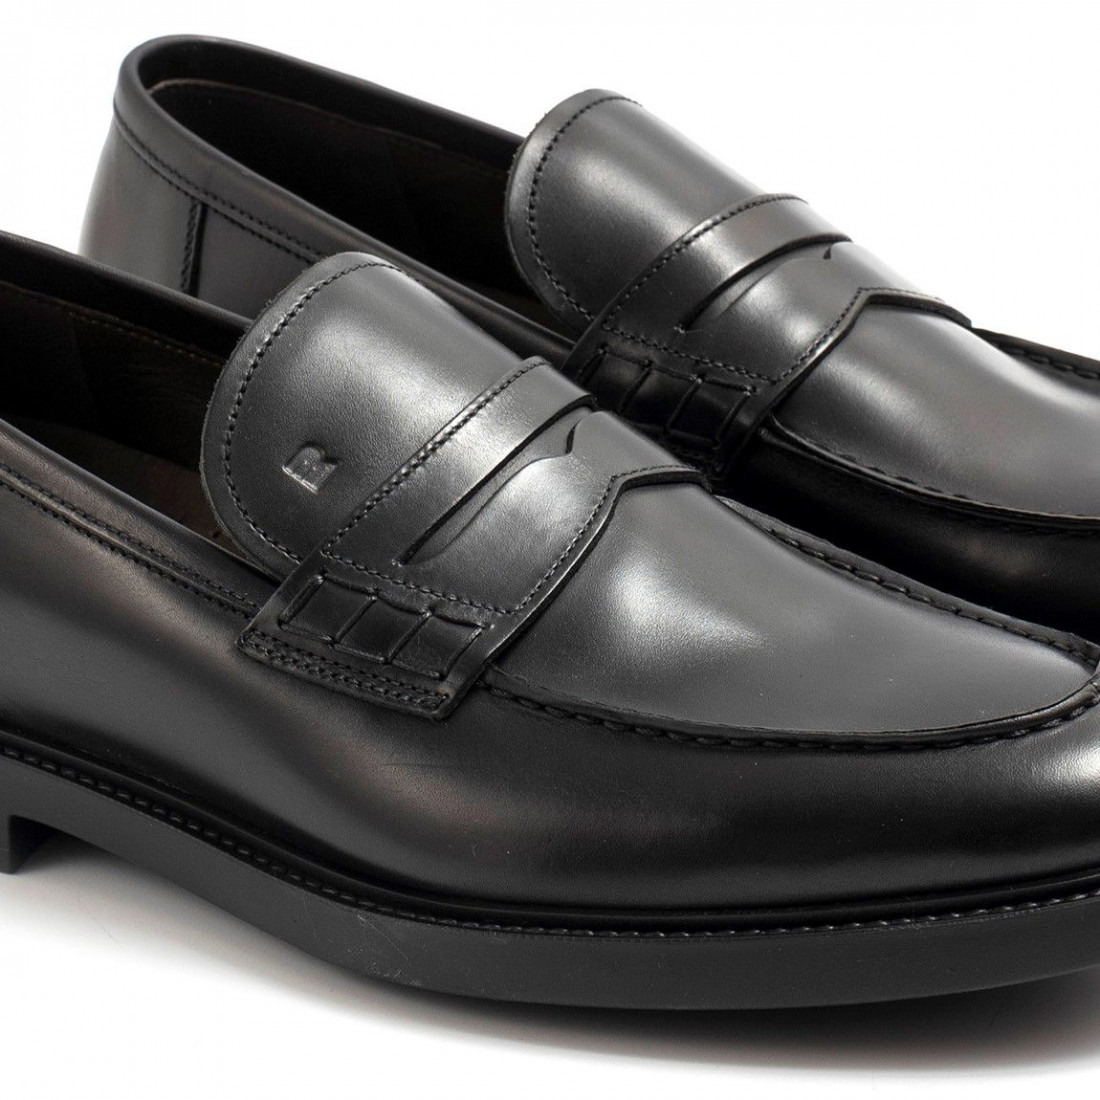 Black leather Fratelli Rossetti moccasins with footbed